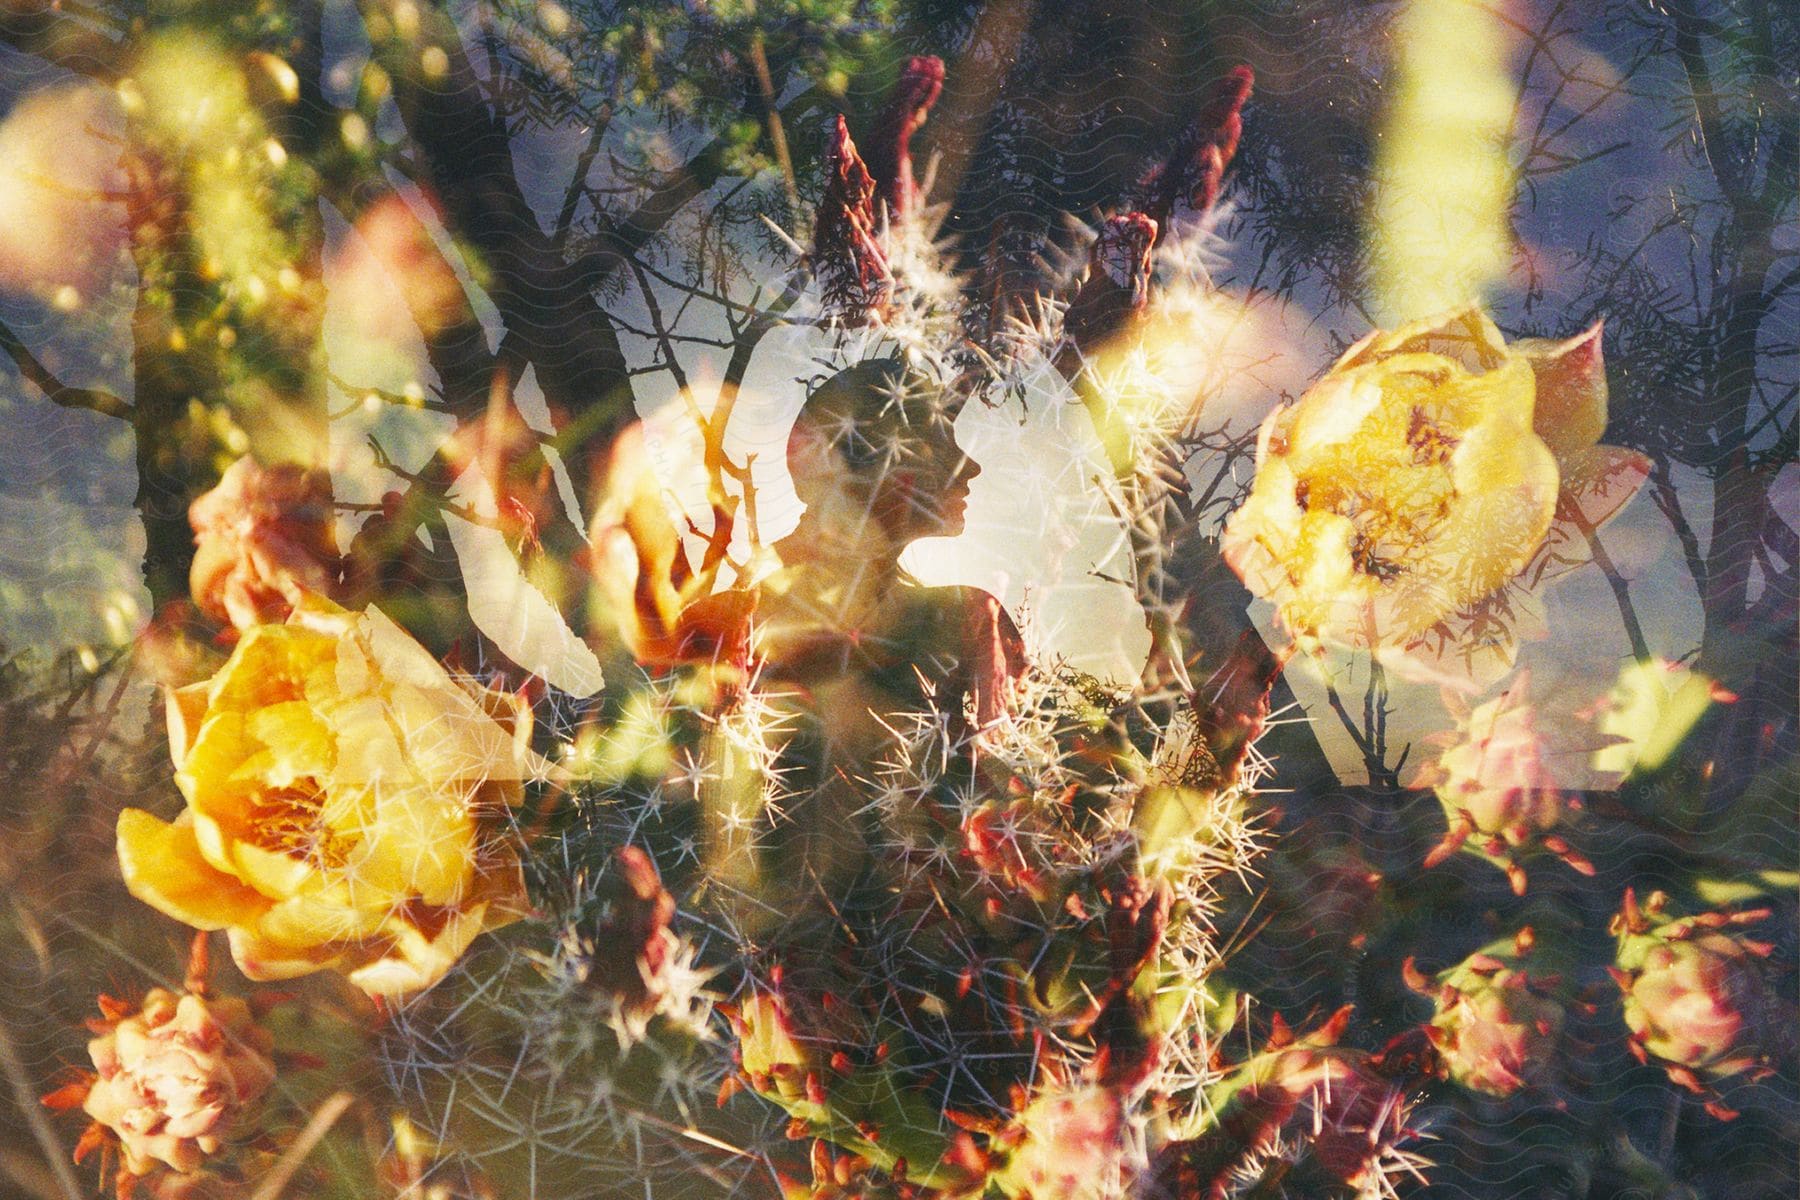 A woman against the sunlight, framed between many flowers and cactuses.